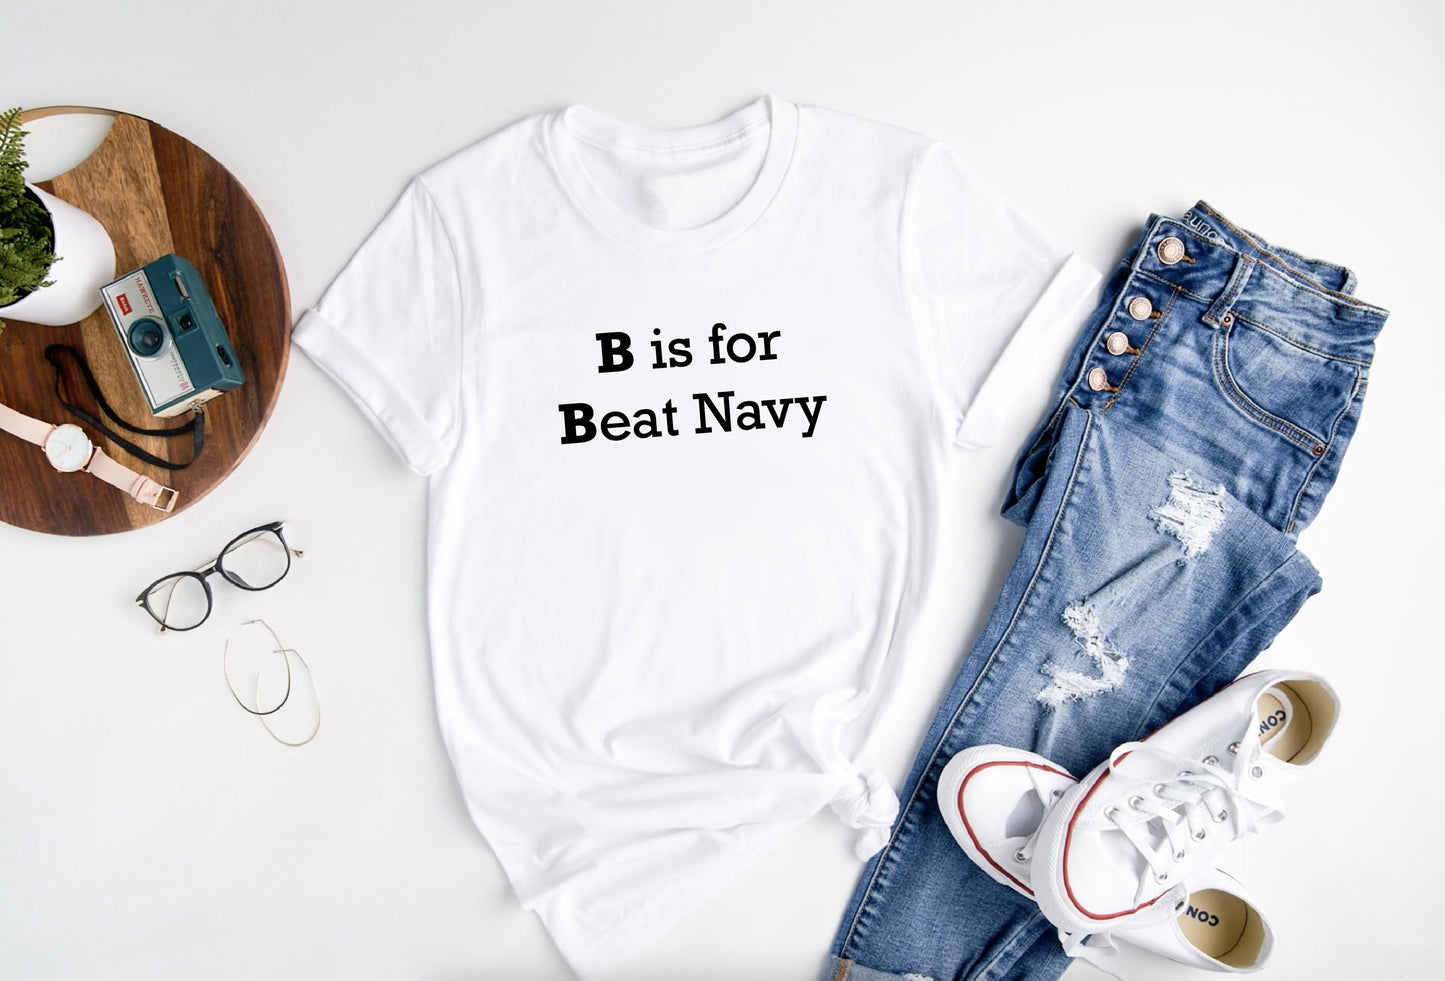 g is for go army, b is for beat navy tshirt